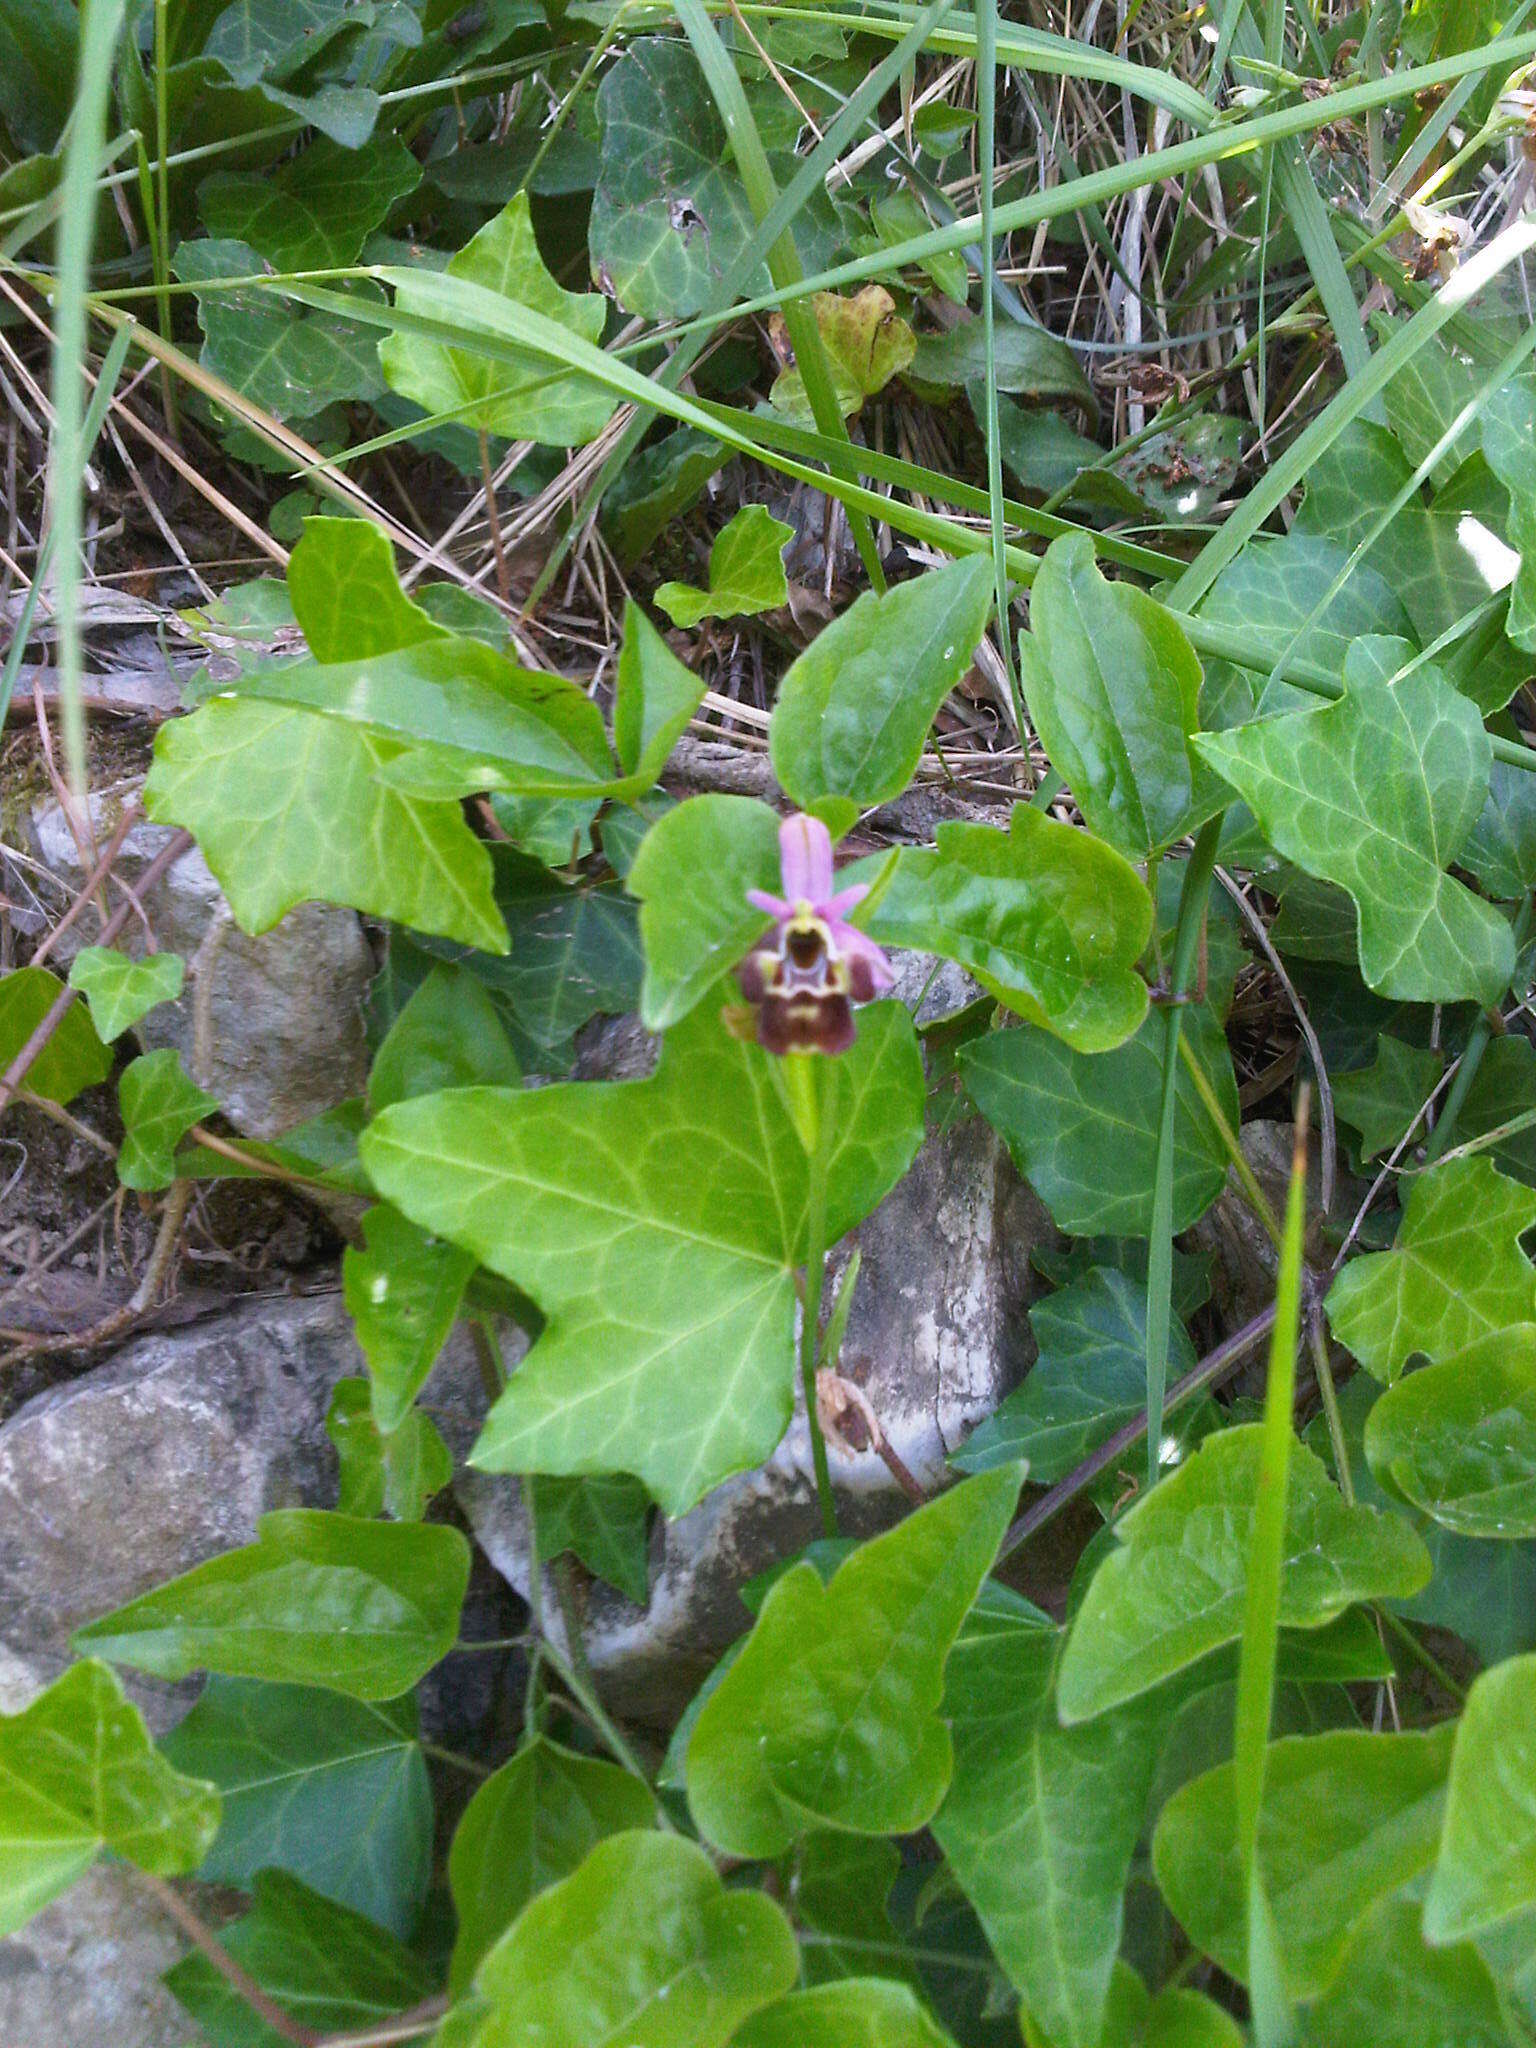 Image of Ophrys vetula Risso